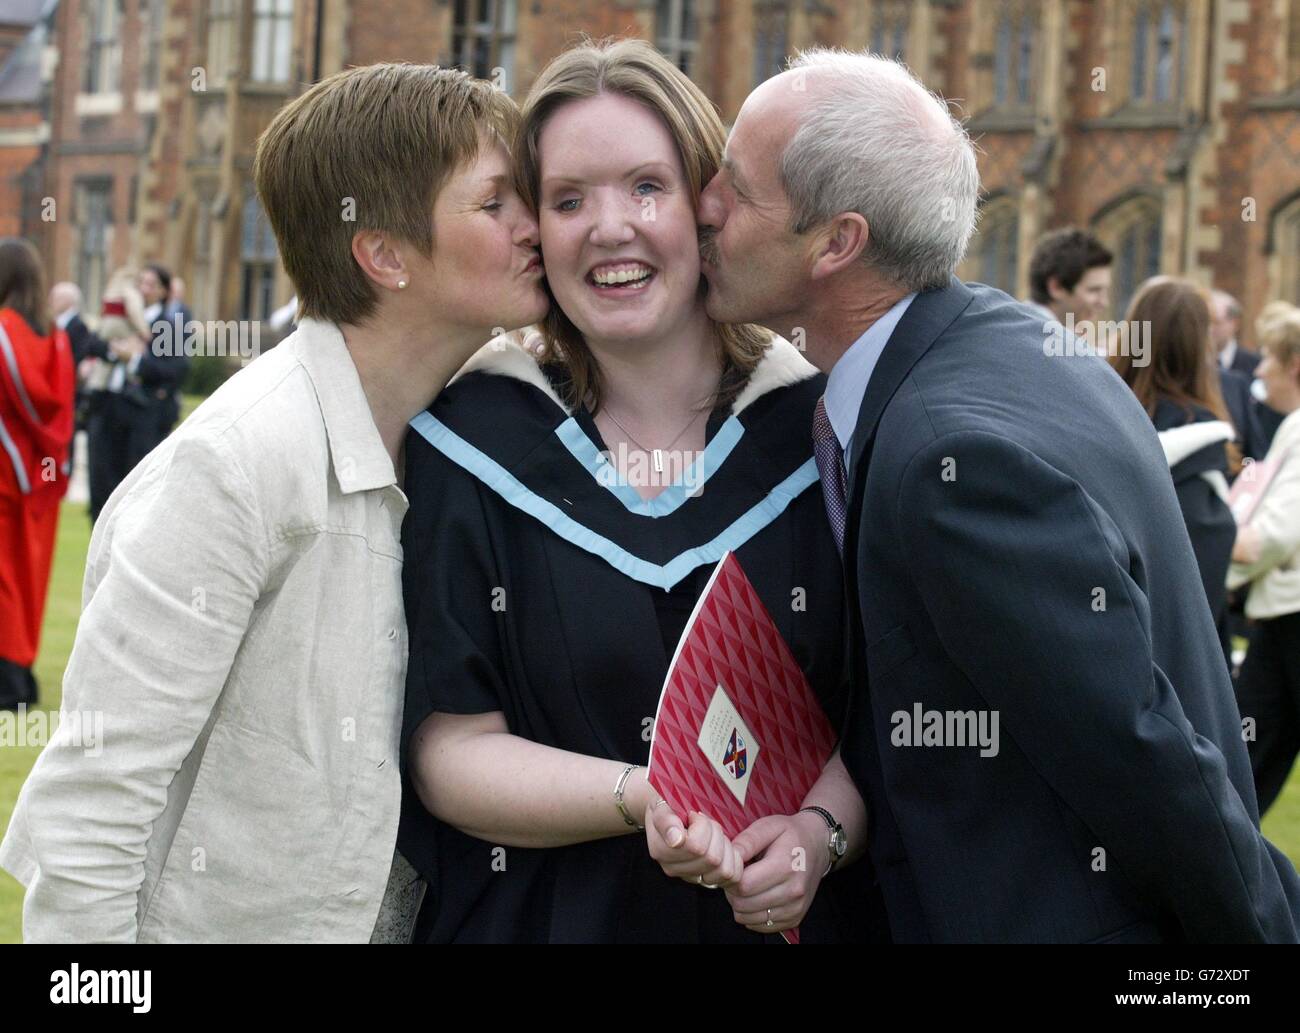 Claire Gallagher, 21 is kissed on the cheek by her parents Marie and Seamus Gallagher at the Queen's University, Belfast, after she received her BA honours degree in music. Clair was blinded in the Omagh bomb atrocity in August 1998. Stock Photo